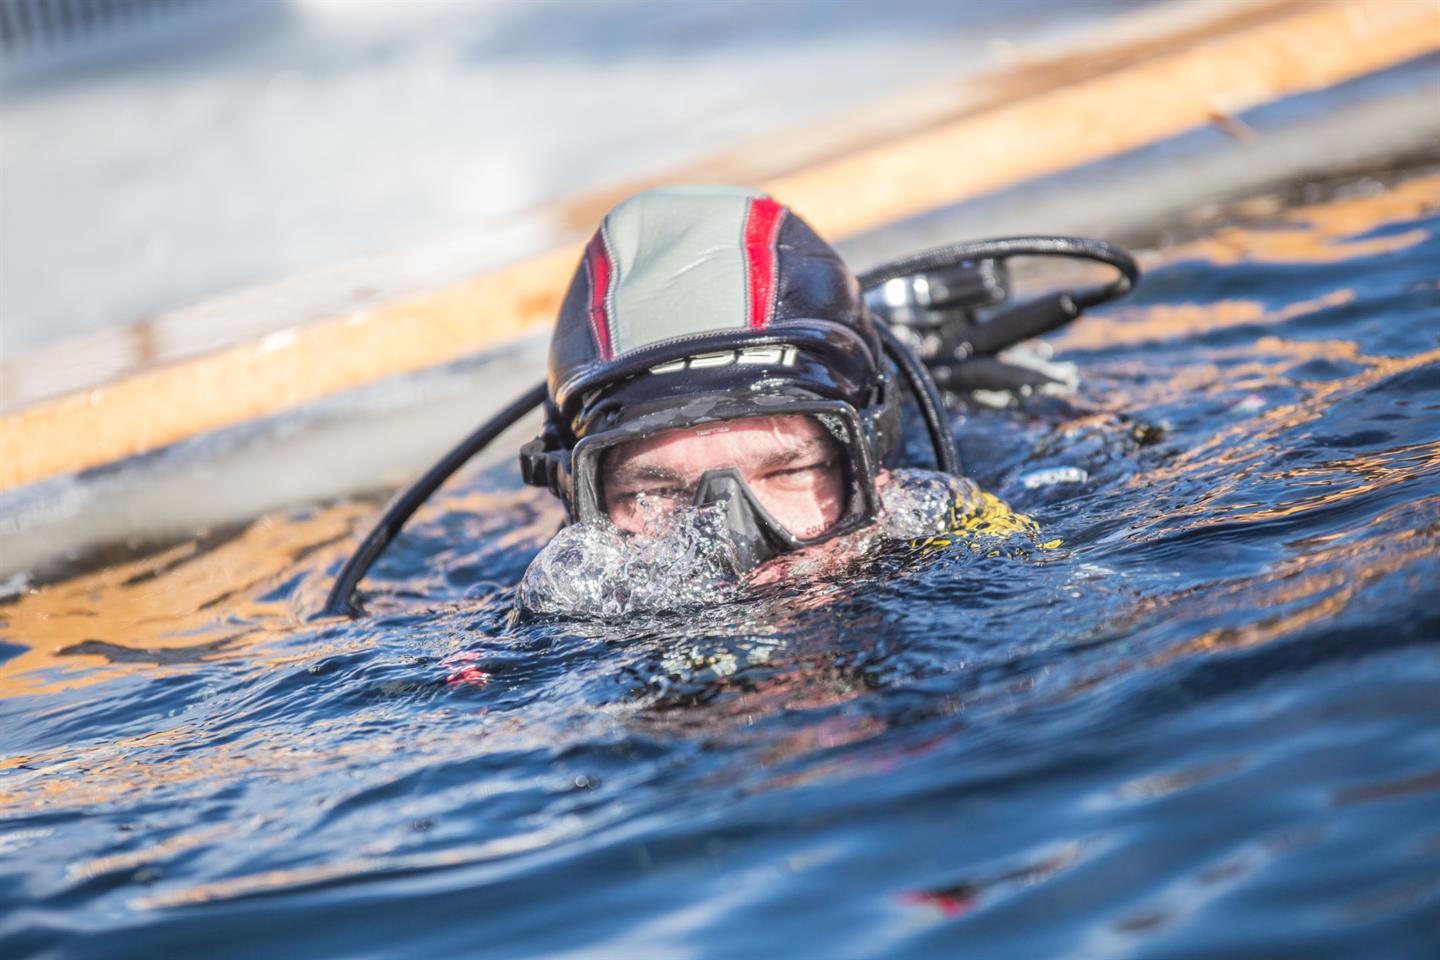 34th Stage of Diving under the Ice ANIS